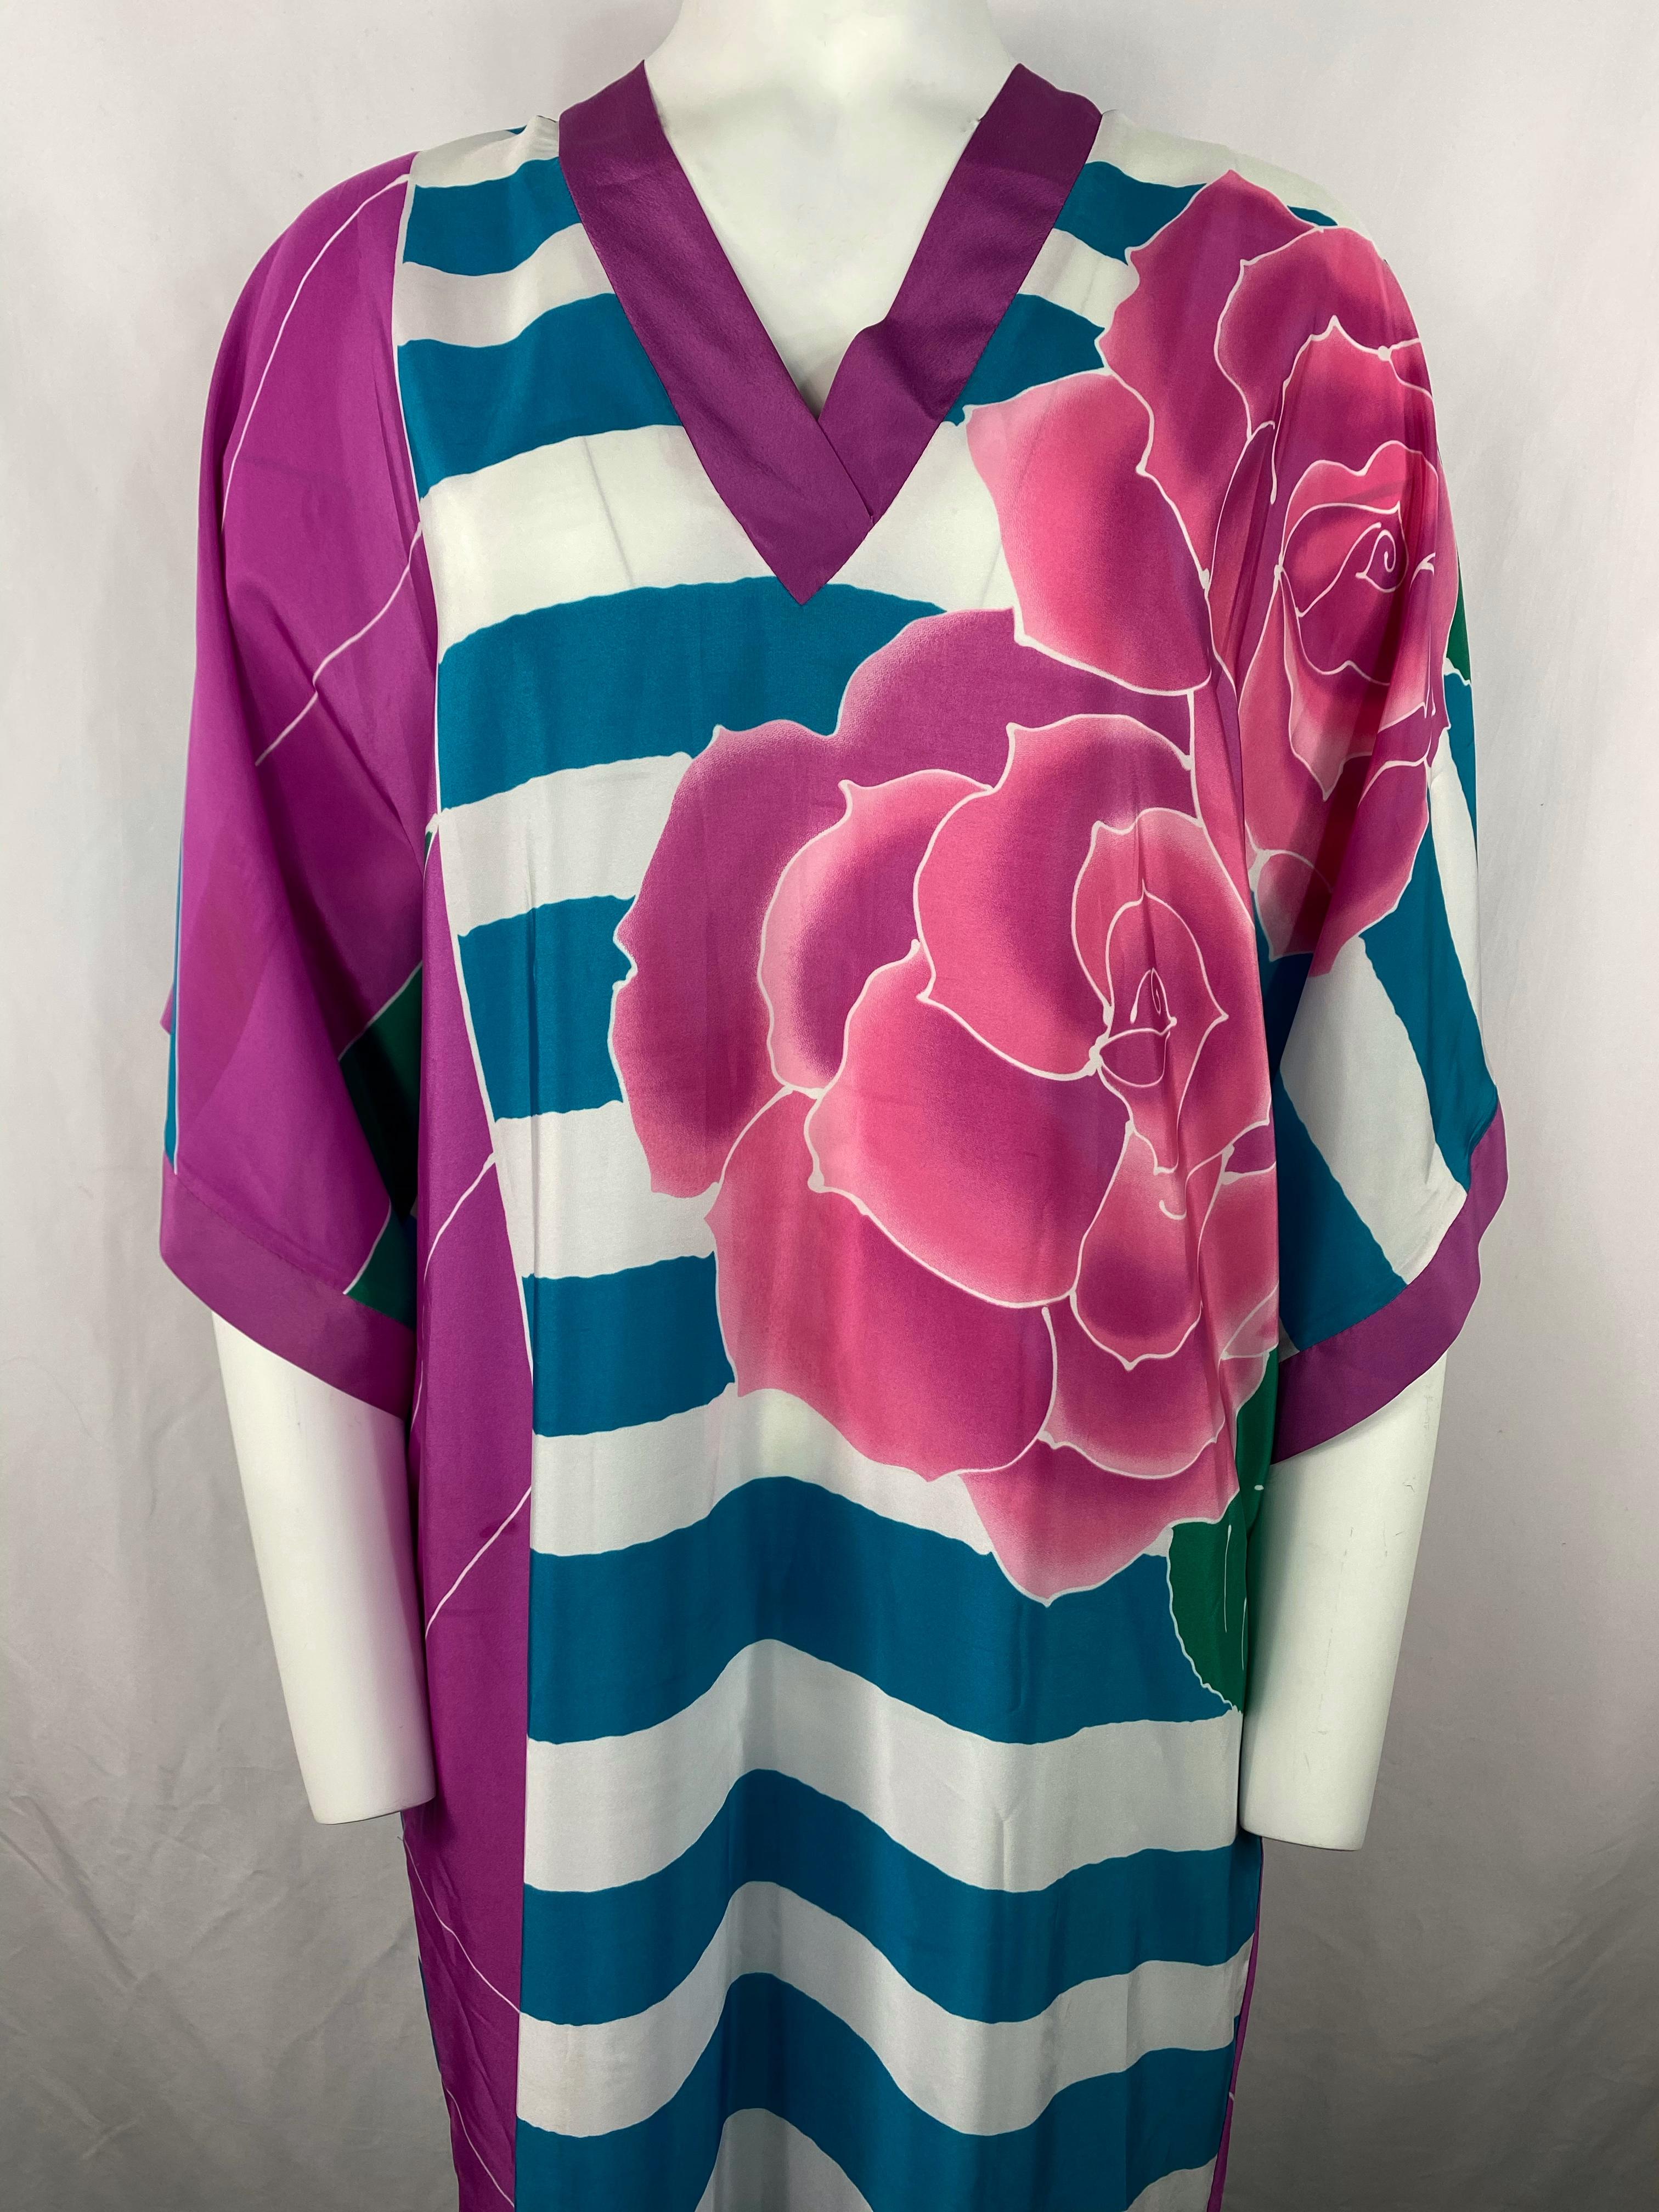 Product details:

Featuring purple, blue, white and green striped and floral print, floor length, pockets on each side, v neck, 3/4 wide sleeves, slit on one side (measures 16